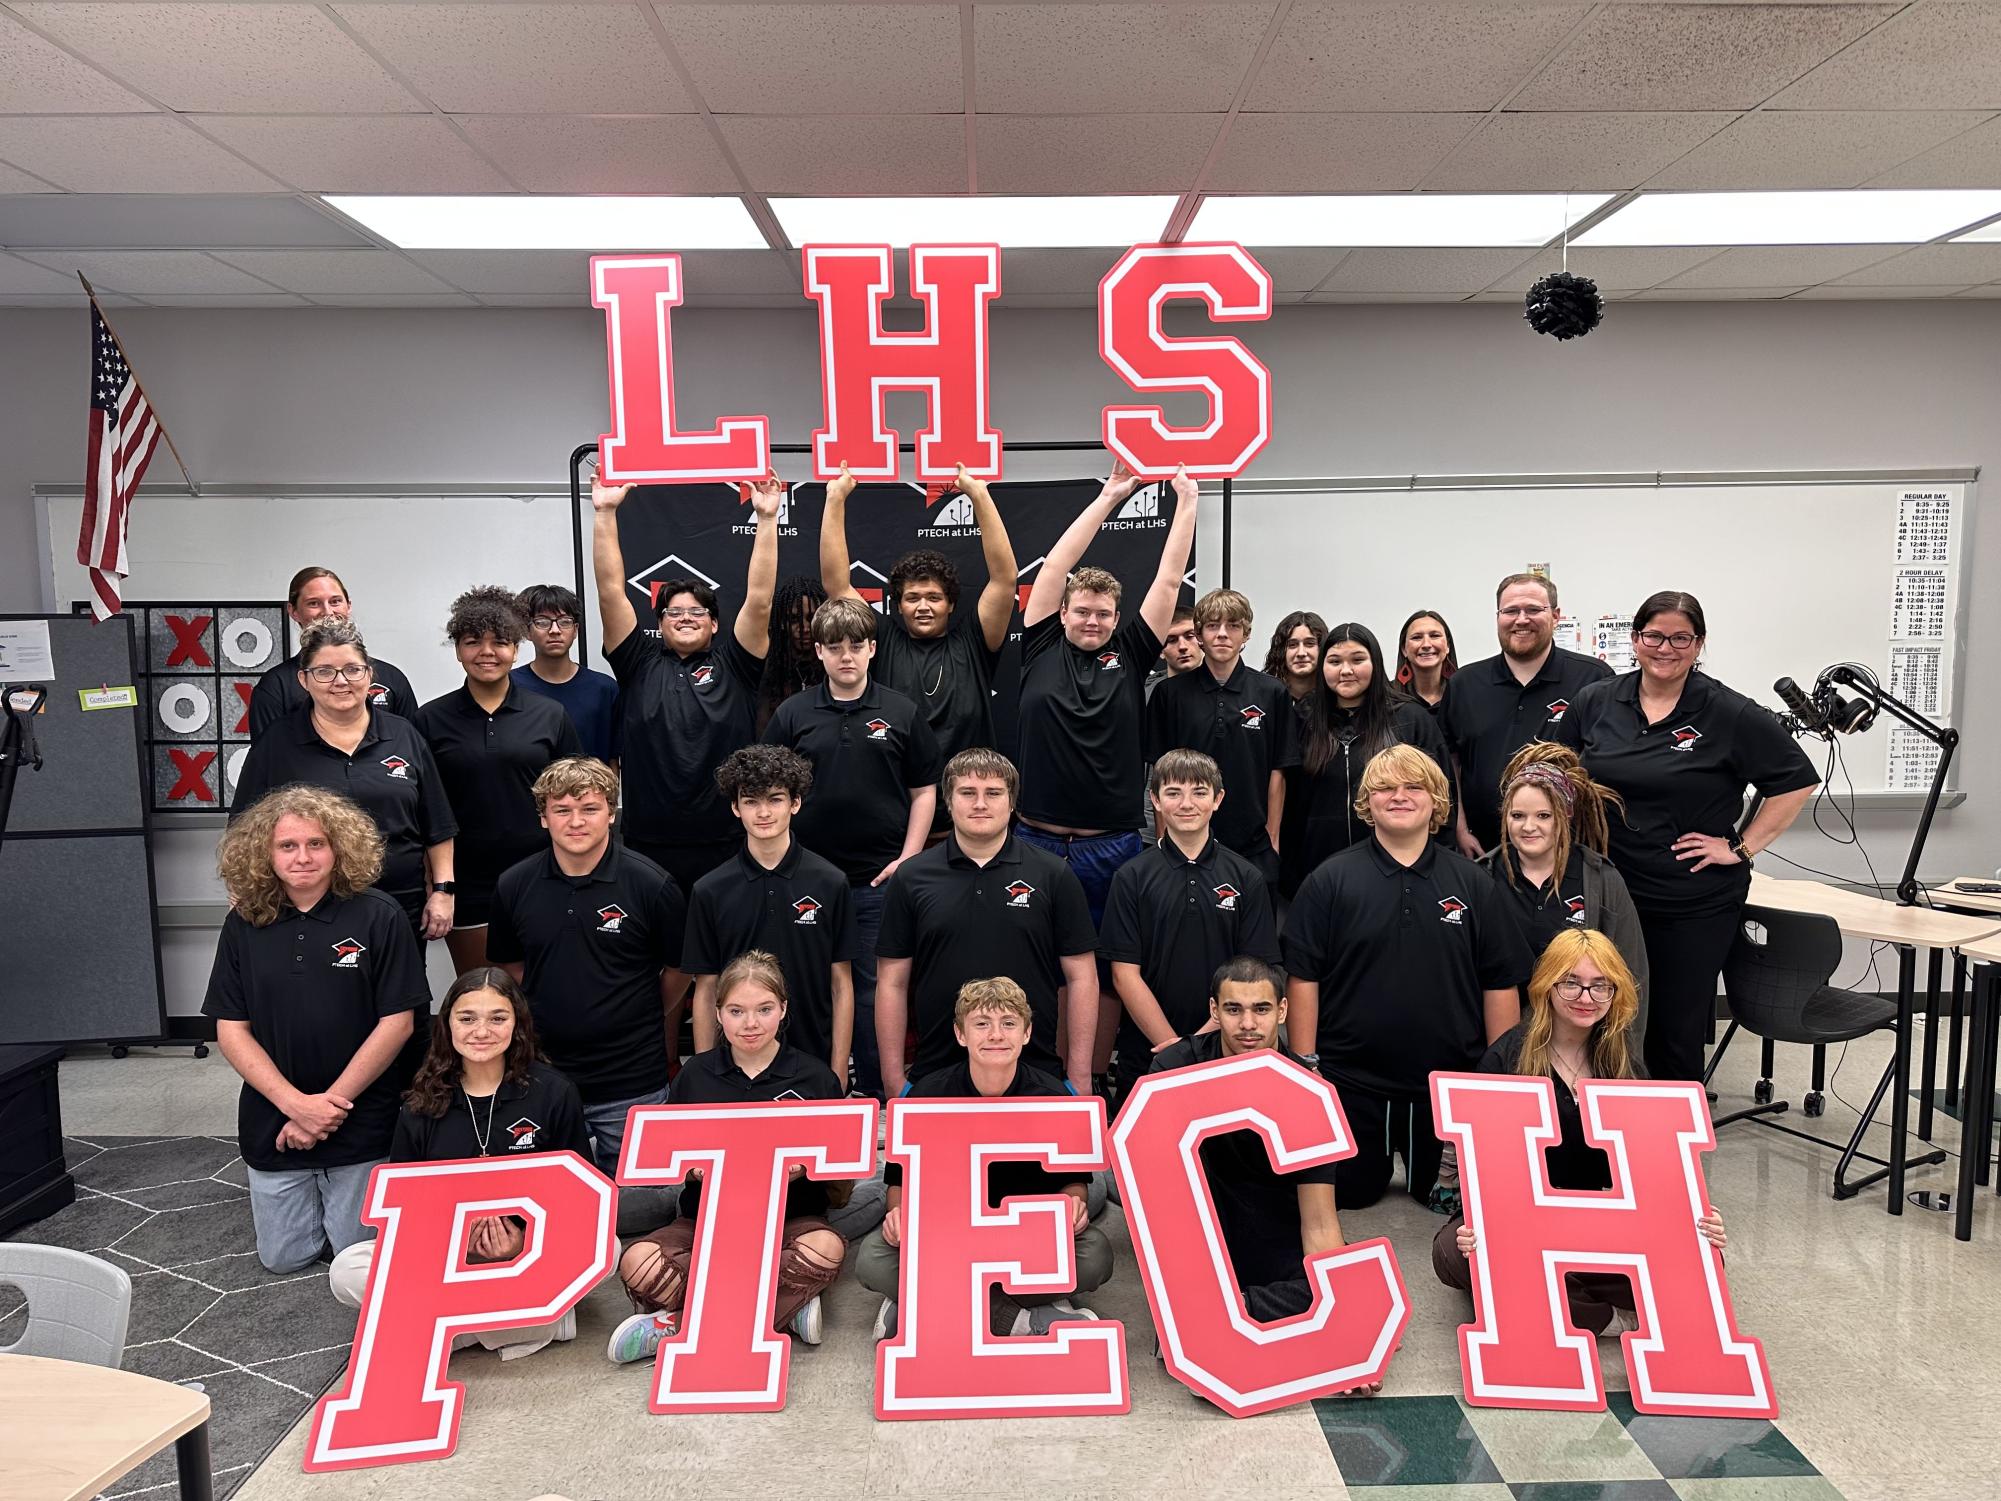 The full P-TECH class of students pose for a picture in their matching polos. Students wear these polos when representing P-TECH in professional settings.